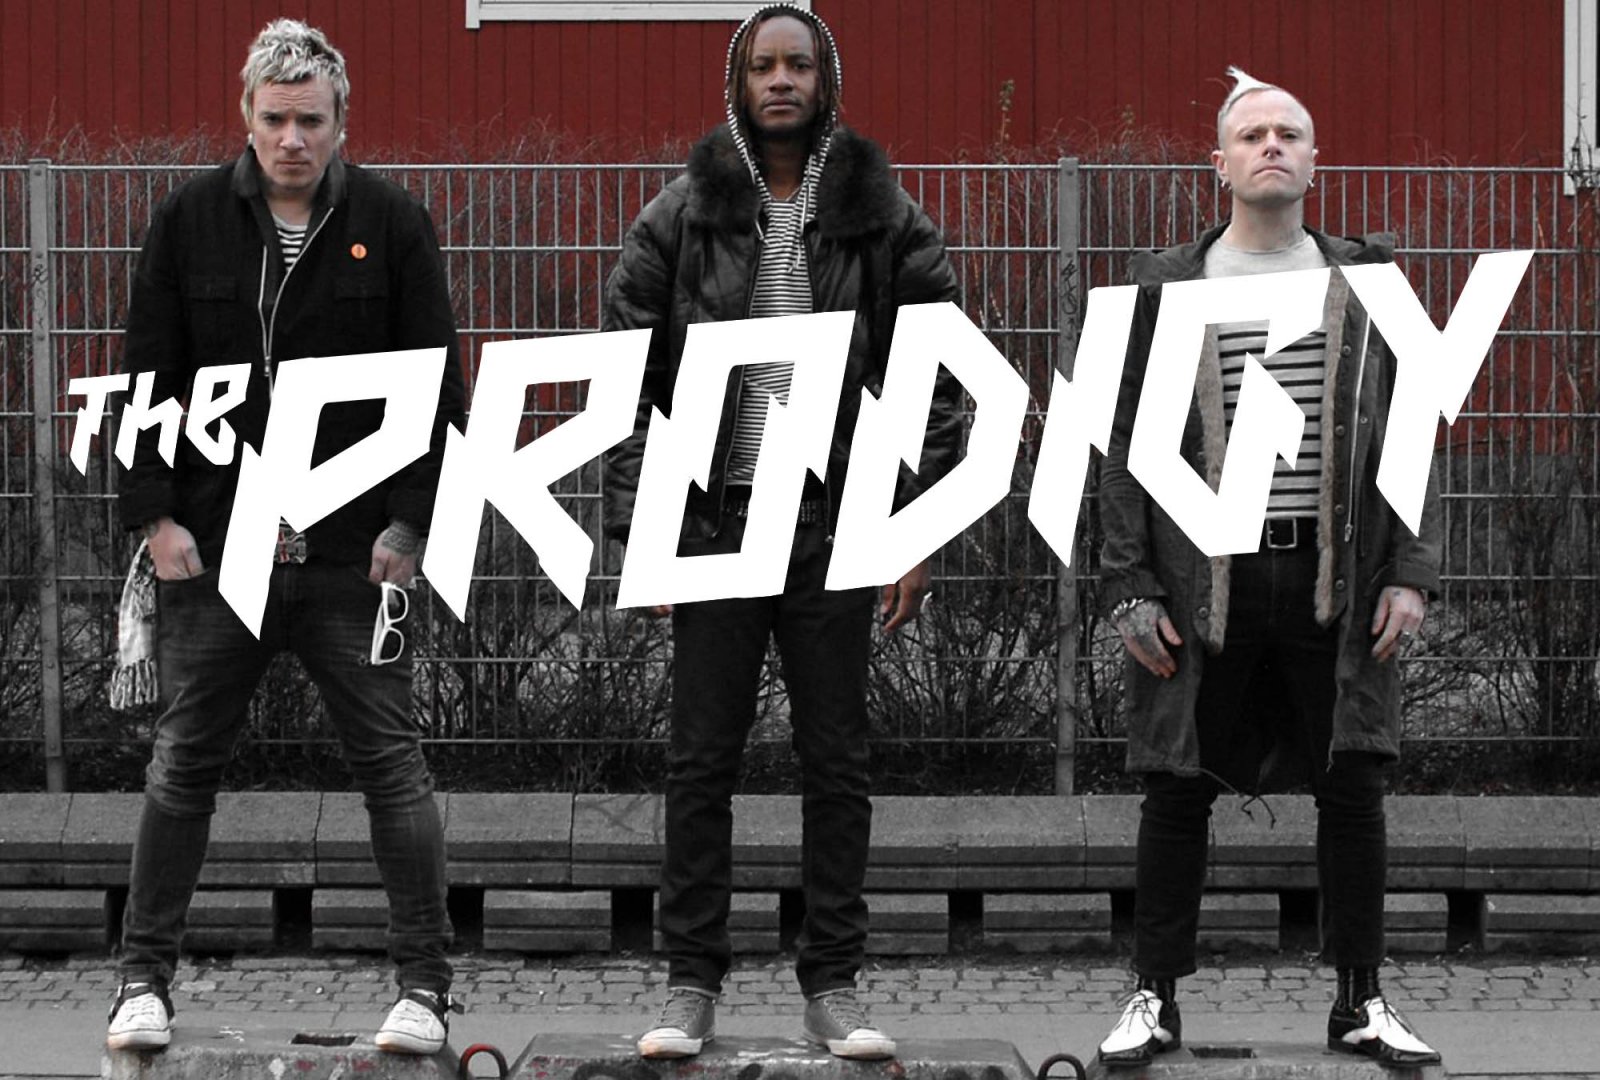 New Album From The Prodigy!